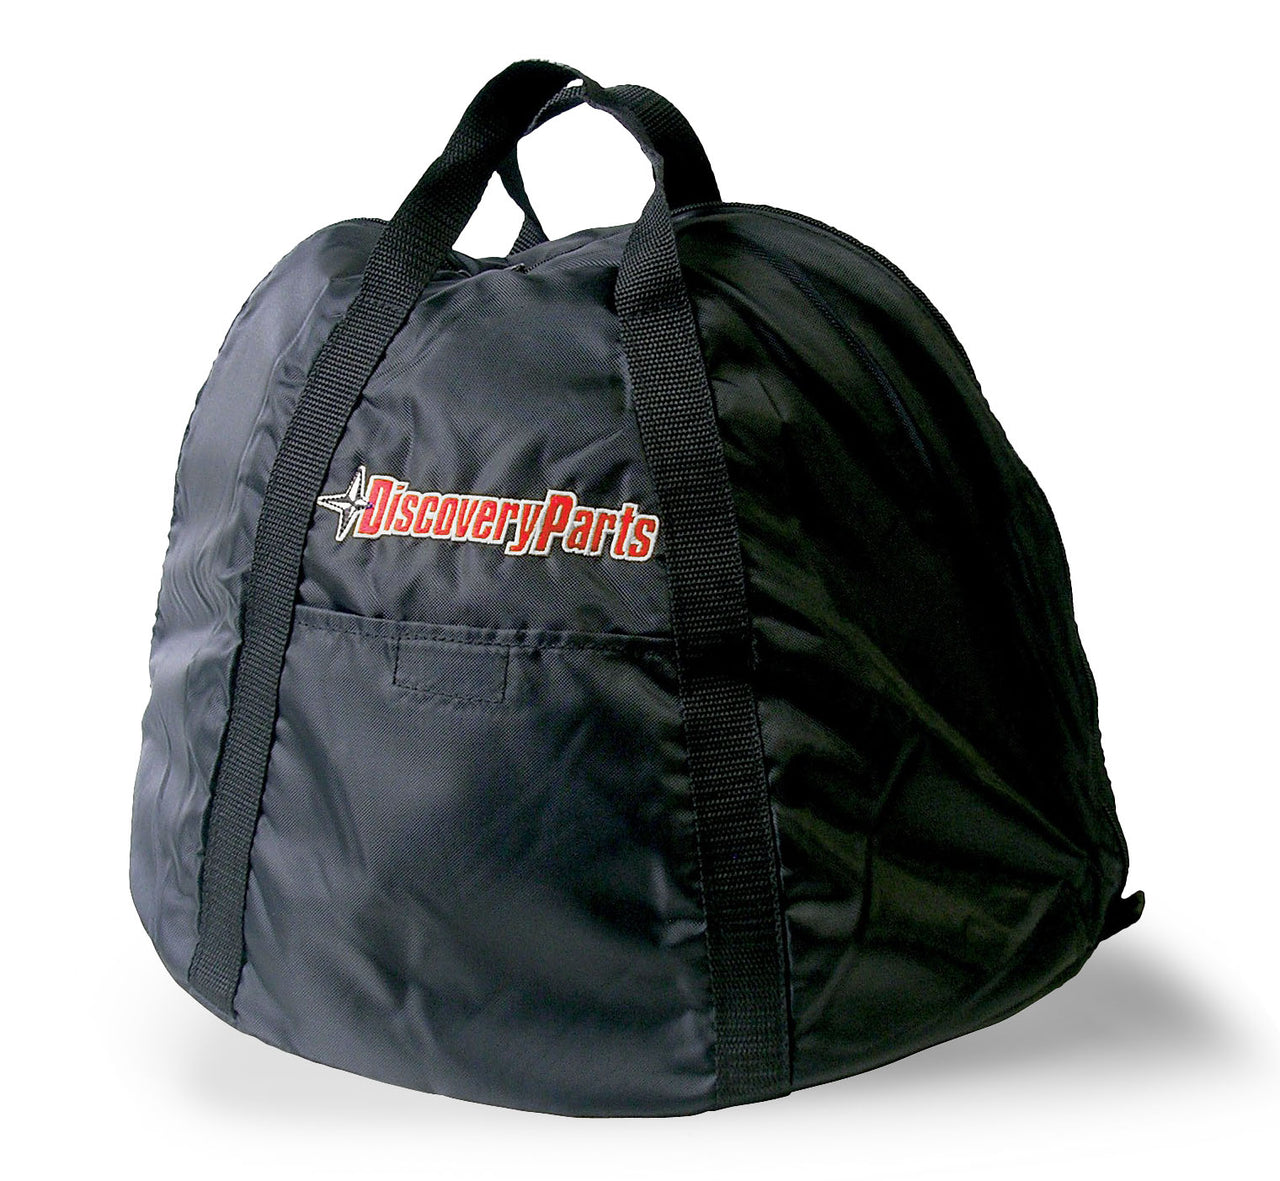 Discovery Parts Pro Helmet Bag is the best way to safely carry your racing helmet at the track and keep it safe in the trailer and around the paddock.